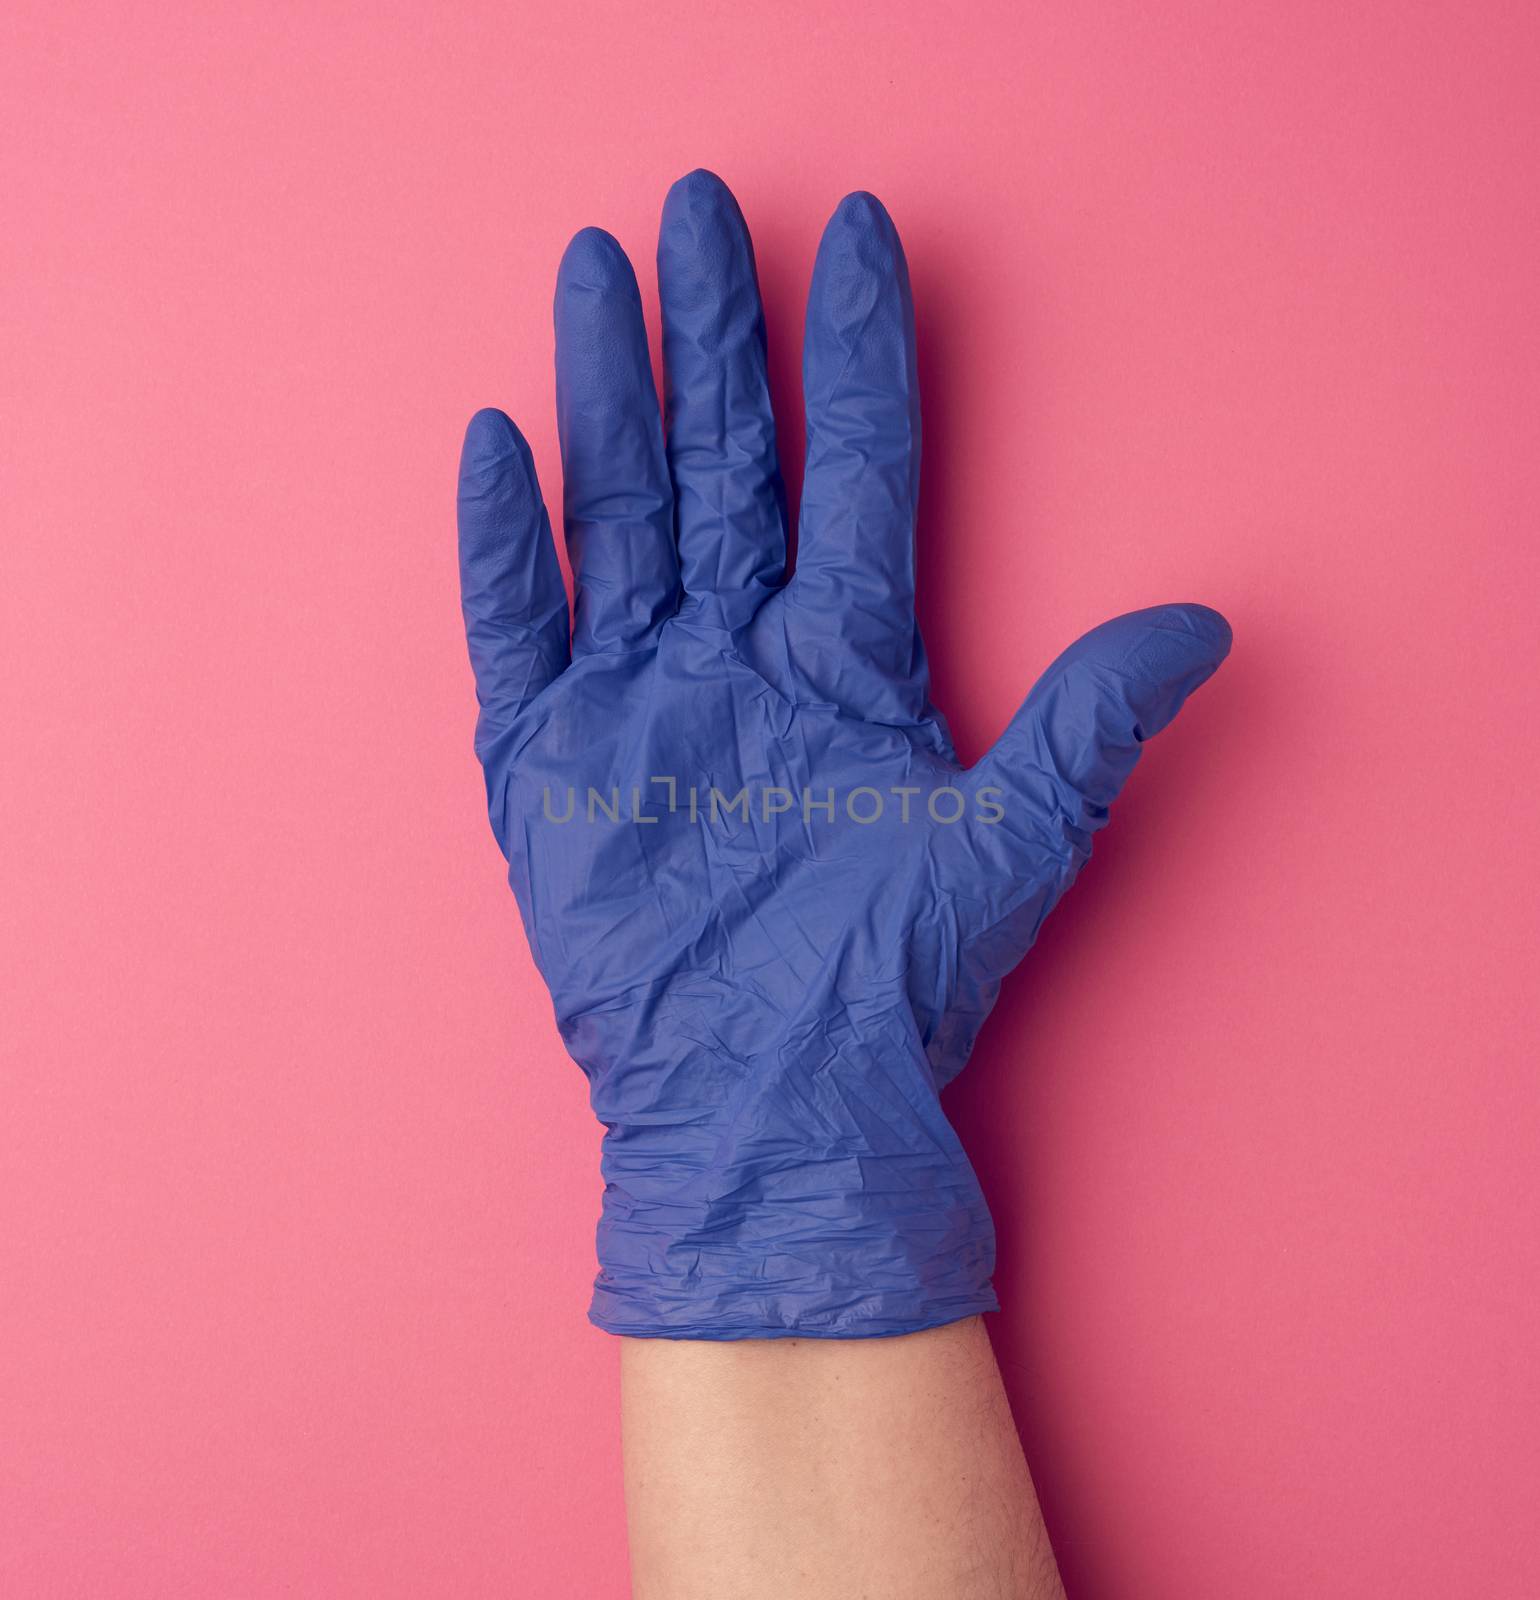 blue medical glove is worn on the arm, part of the body on a pin by ndanko